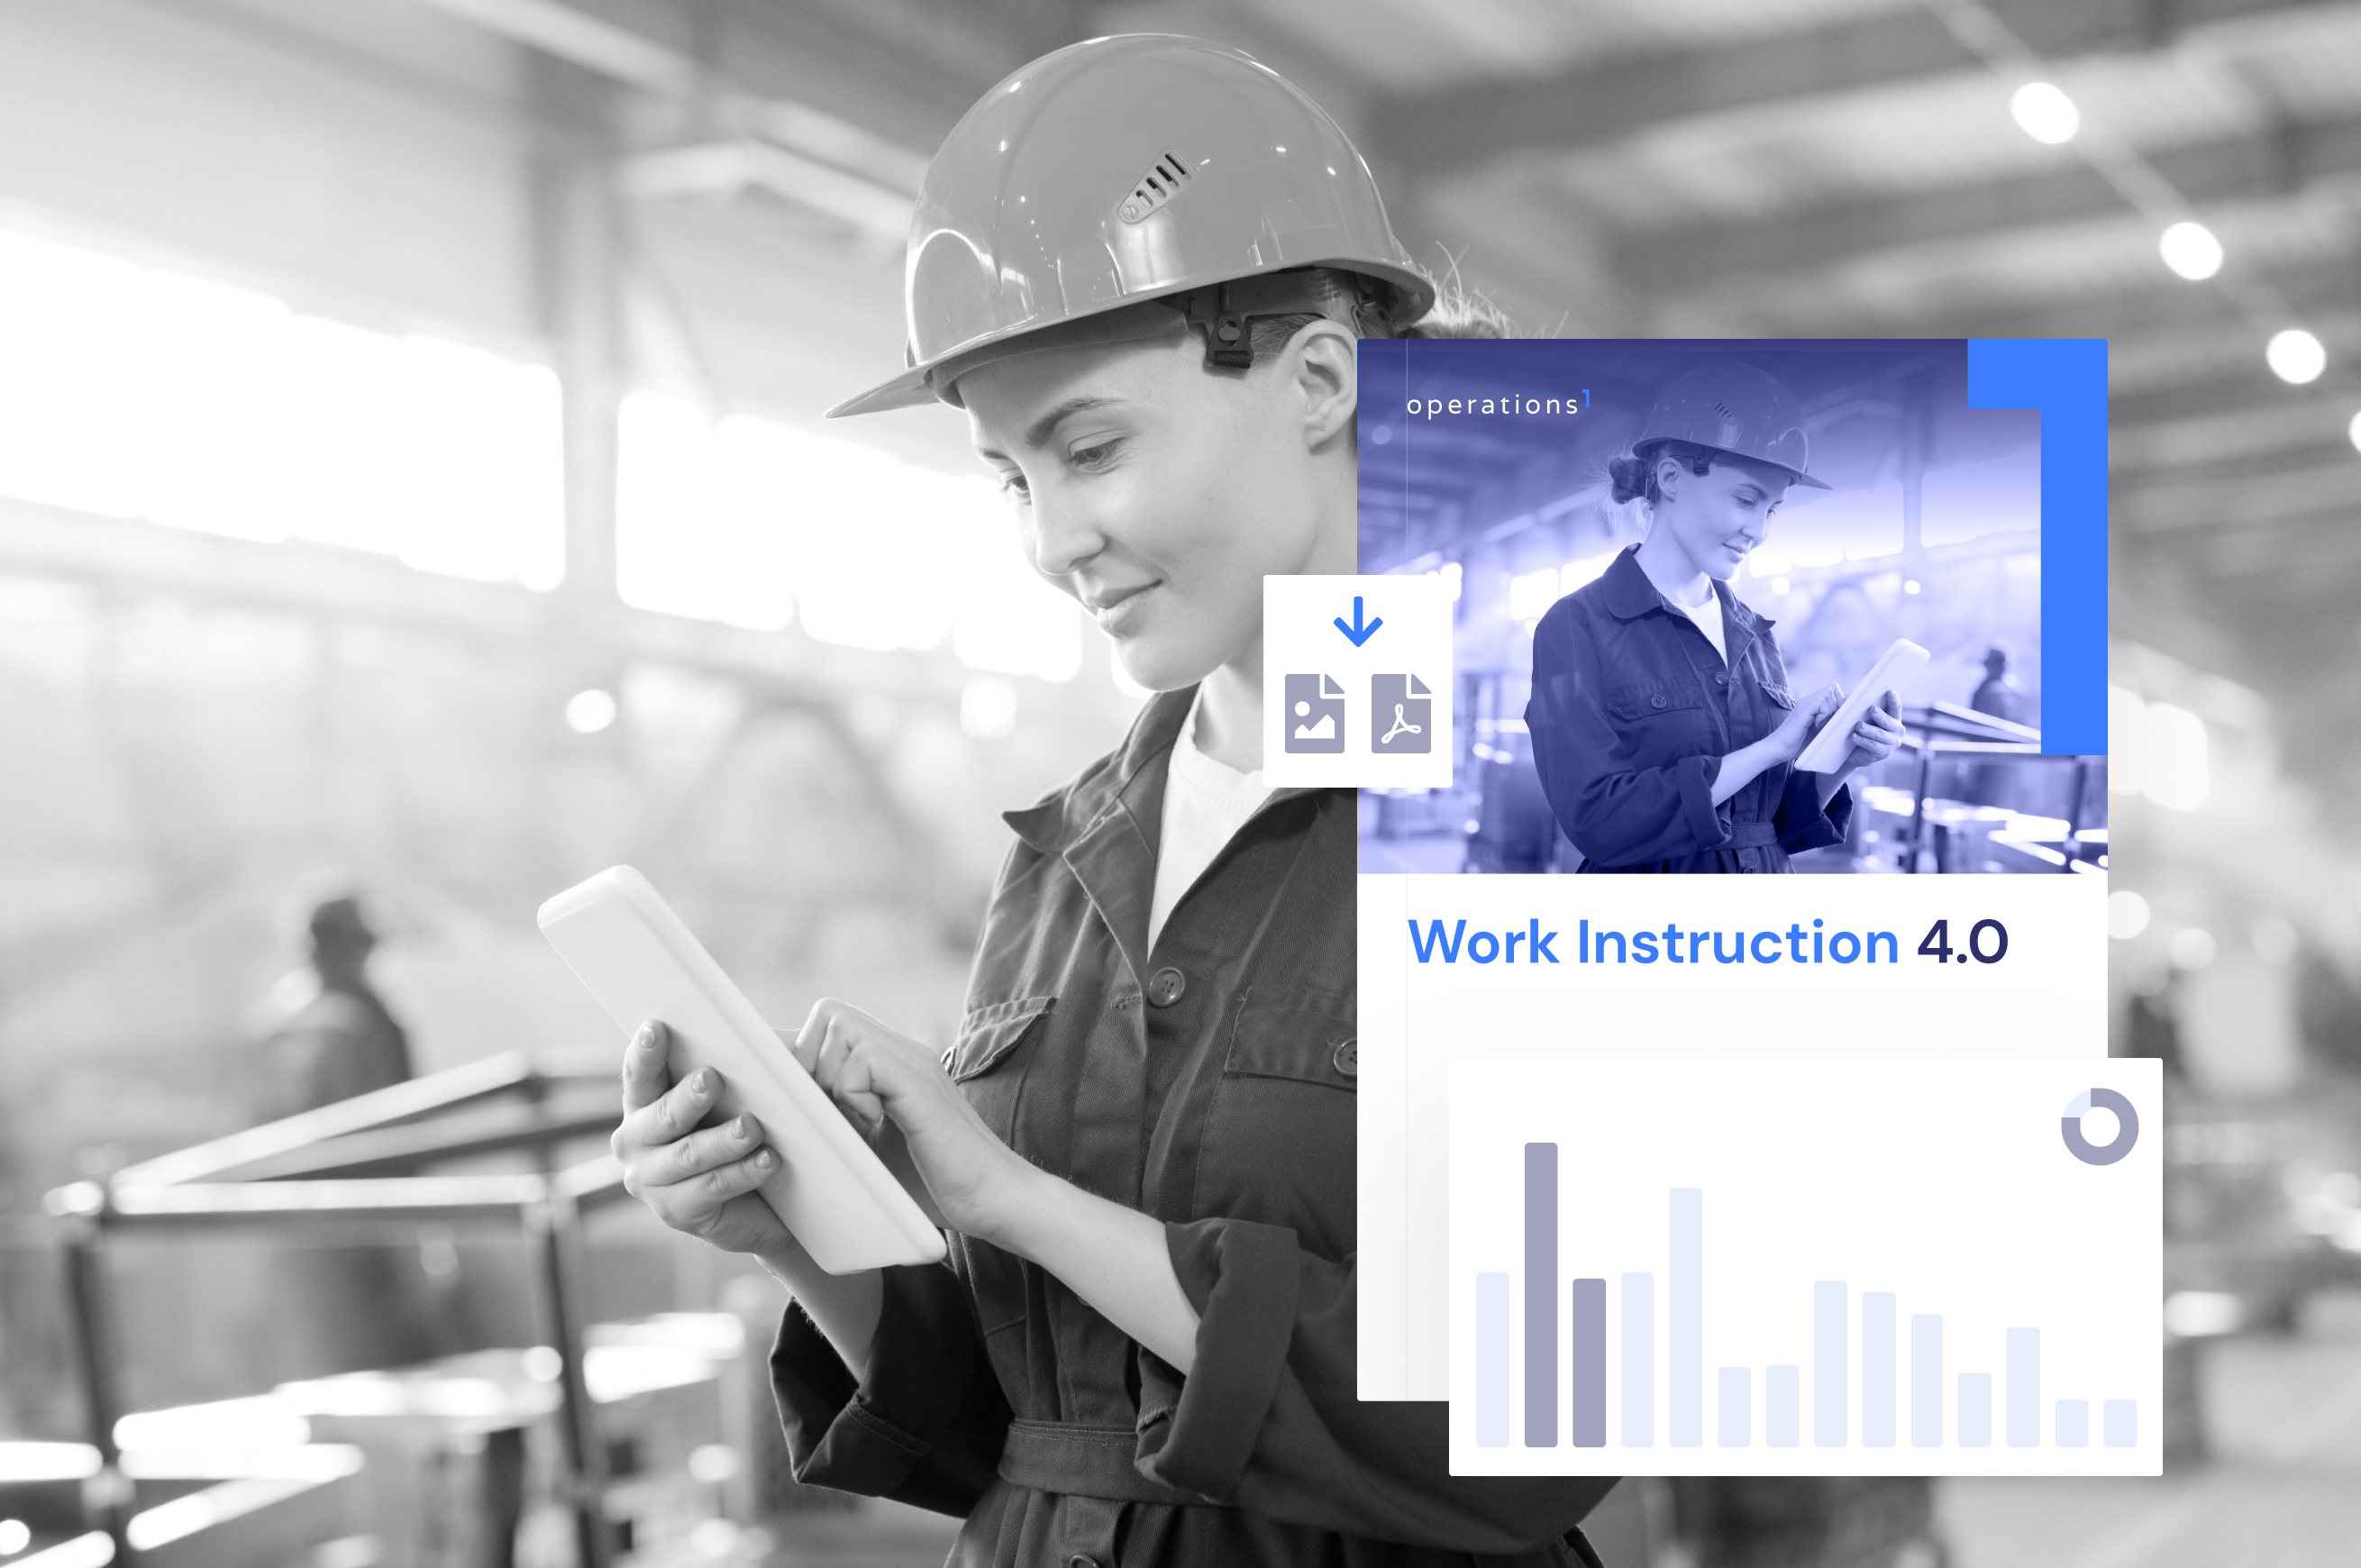 download-the-e-paper-work-instruction-4.0